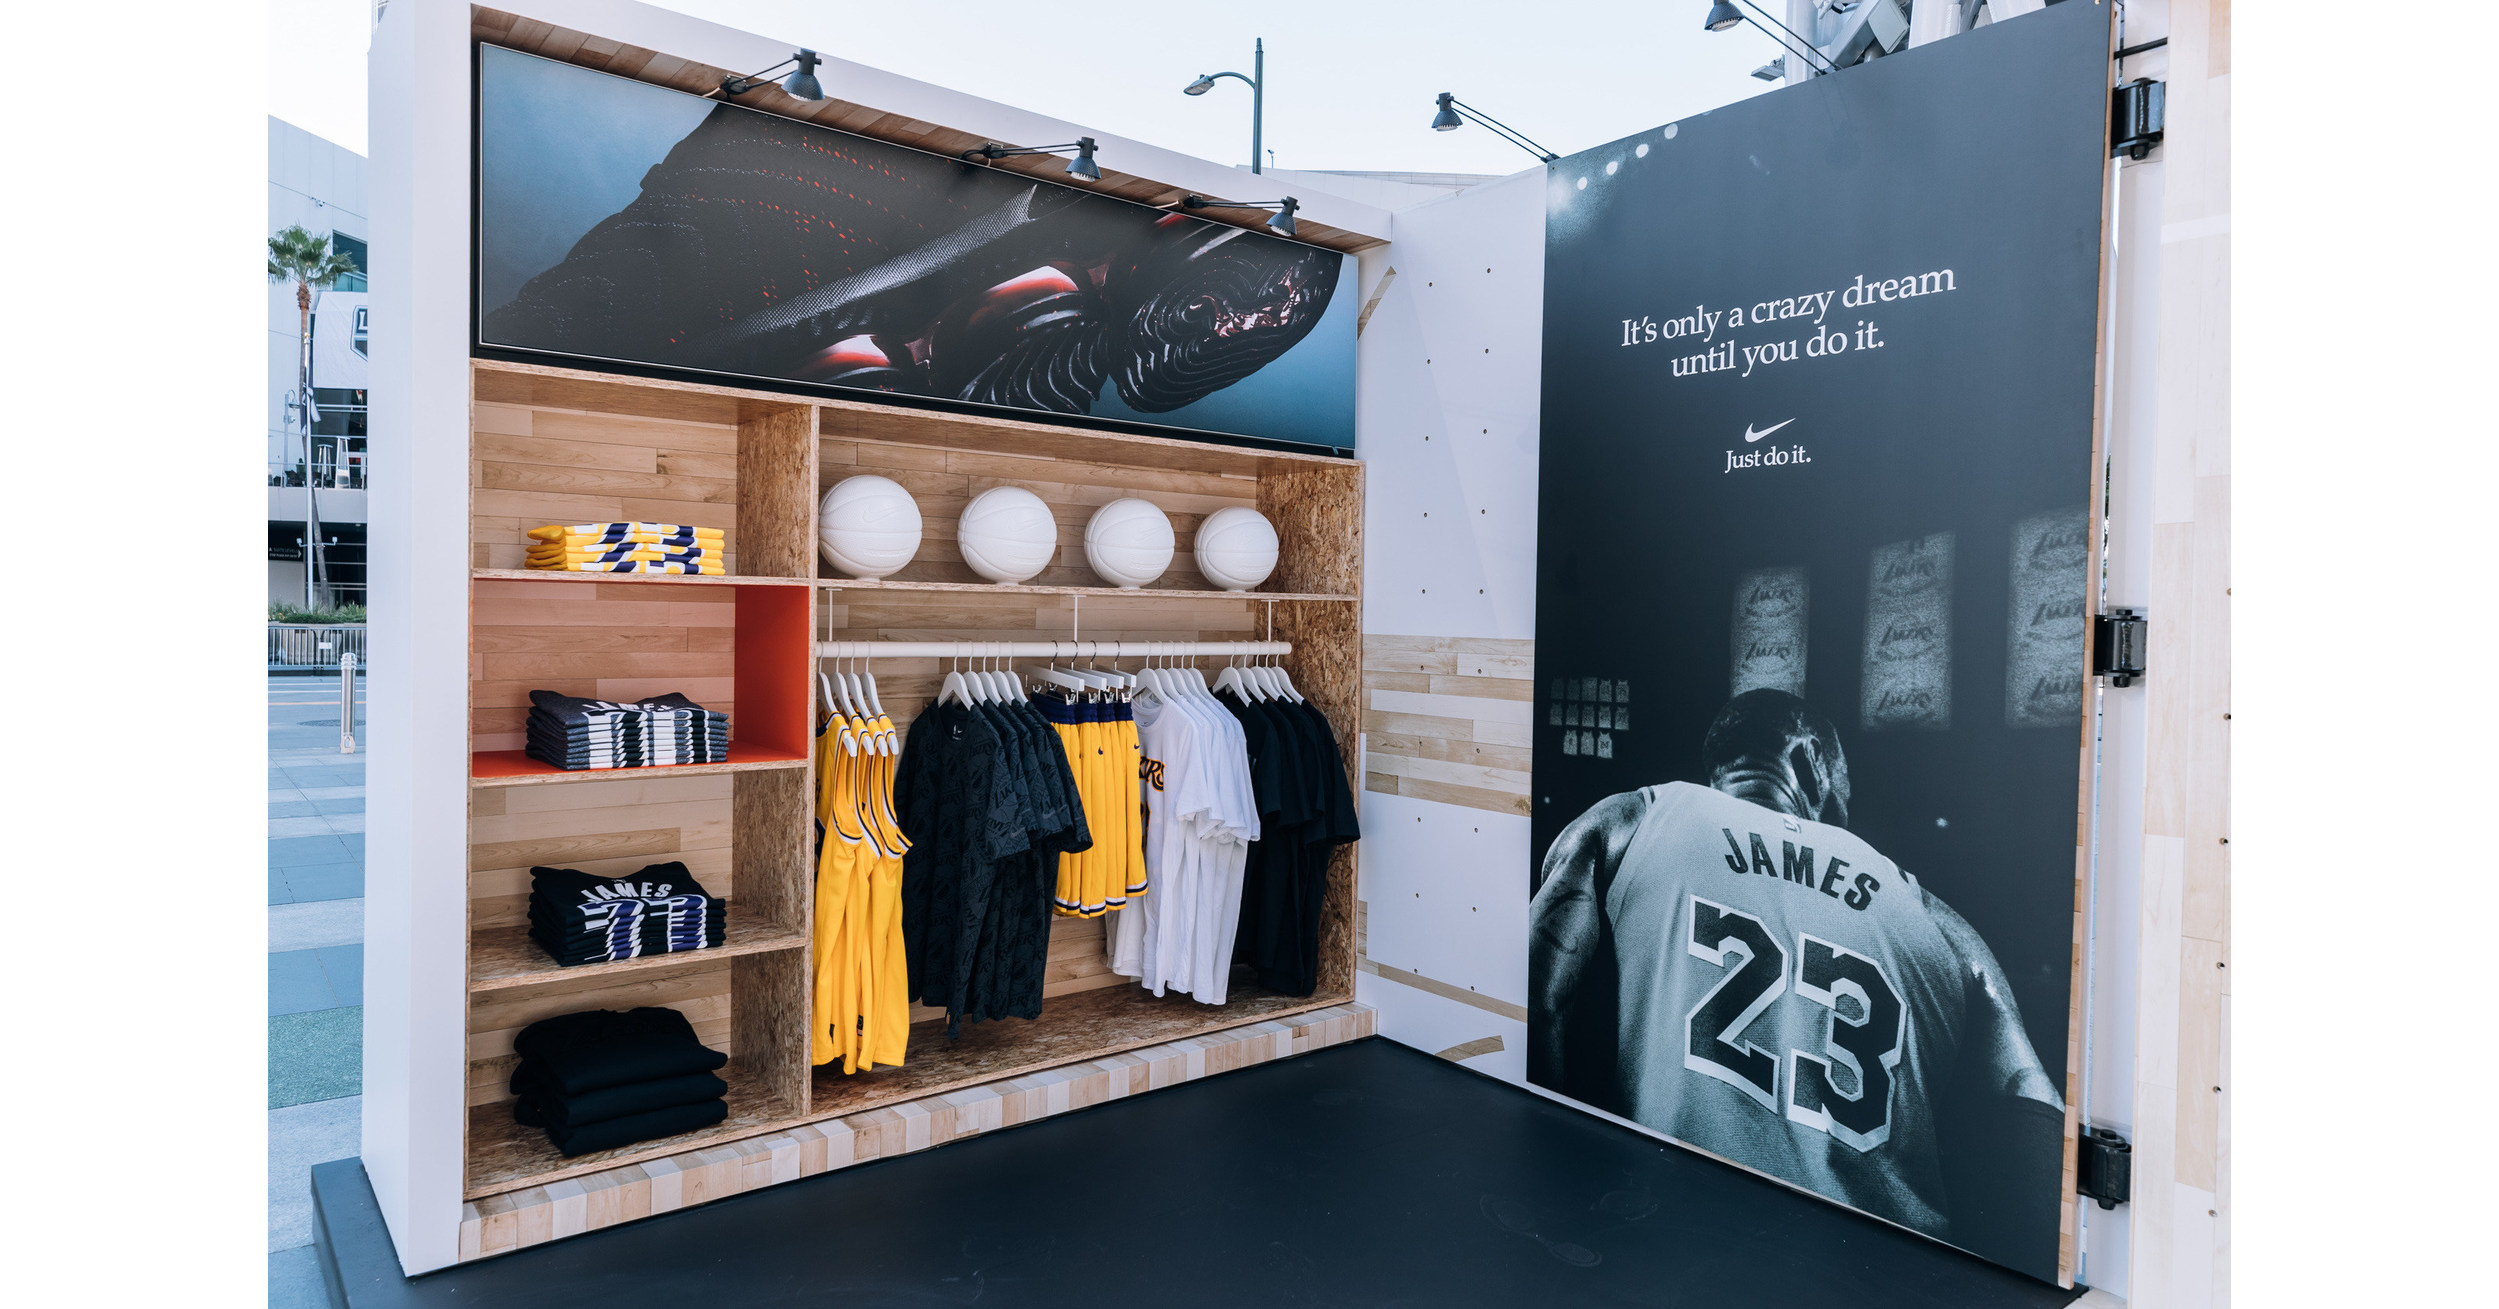 Loco Vacante Precaución Foot Locker & Nike Celebrate The Return Of Basketball With Two Elevated  Experiences, Kicking Off In L.A.